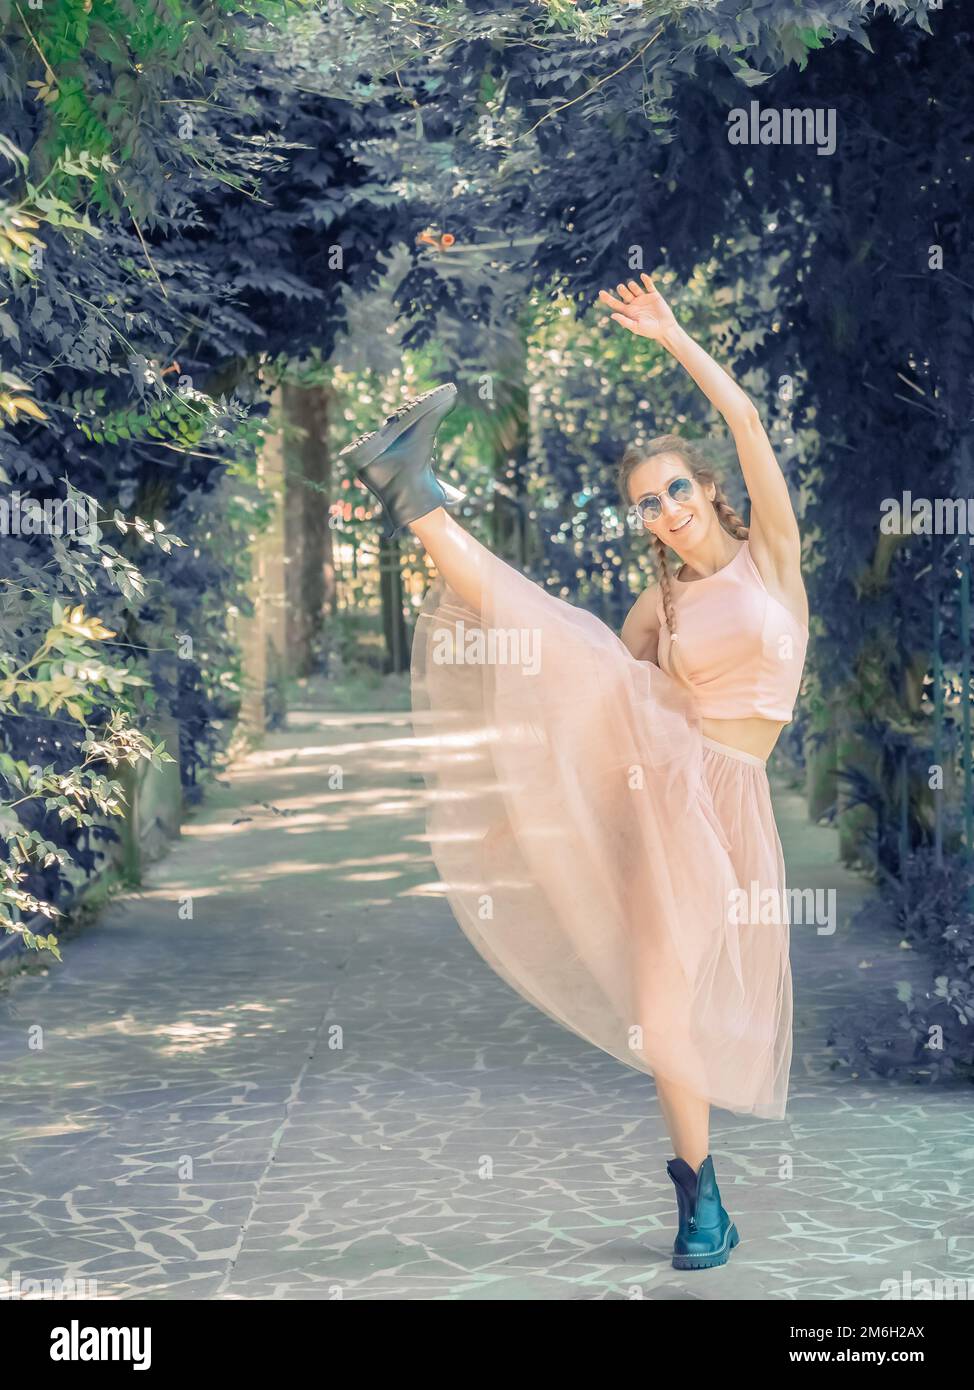 A lady with pigtails in a tutu and rough shoes makes a forward leg swing in an alley in a summer park. Stock Photo